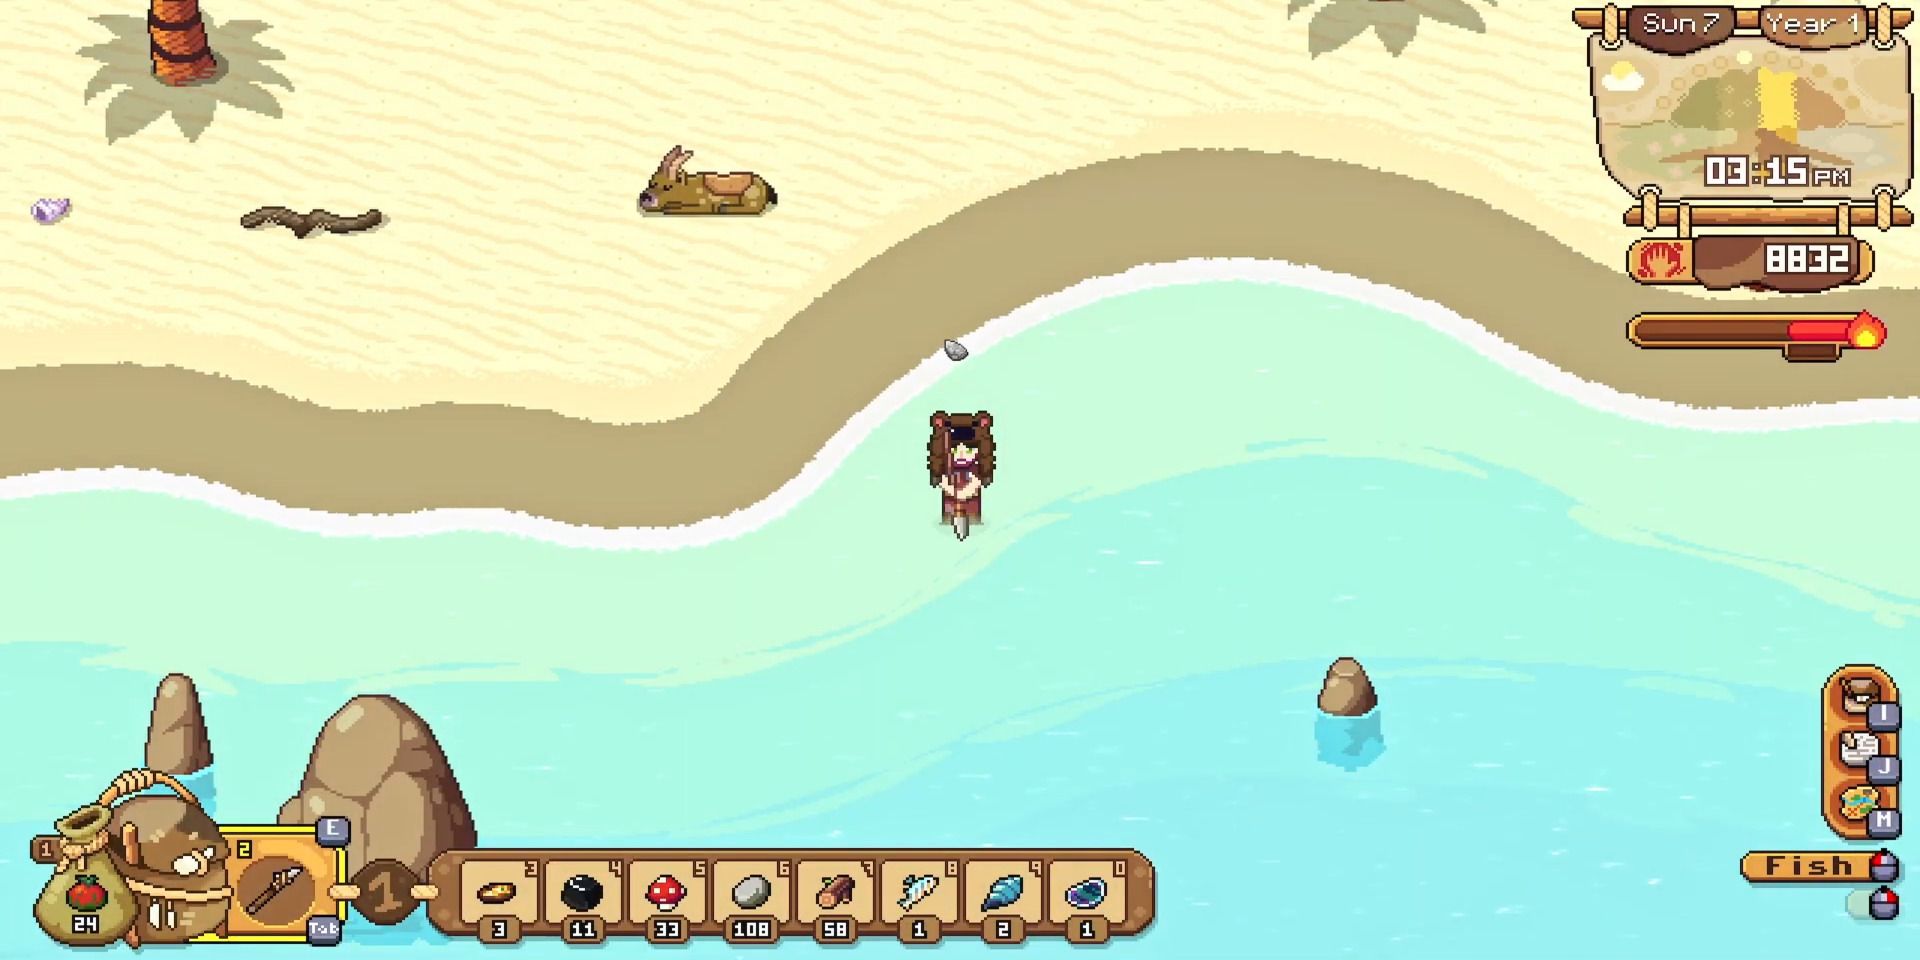 Fishing in the Beach in Roots of Pacha using a Harpoon